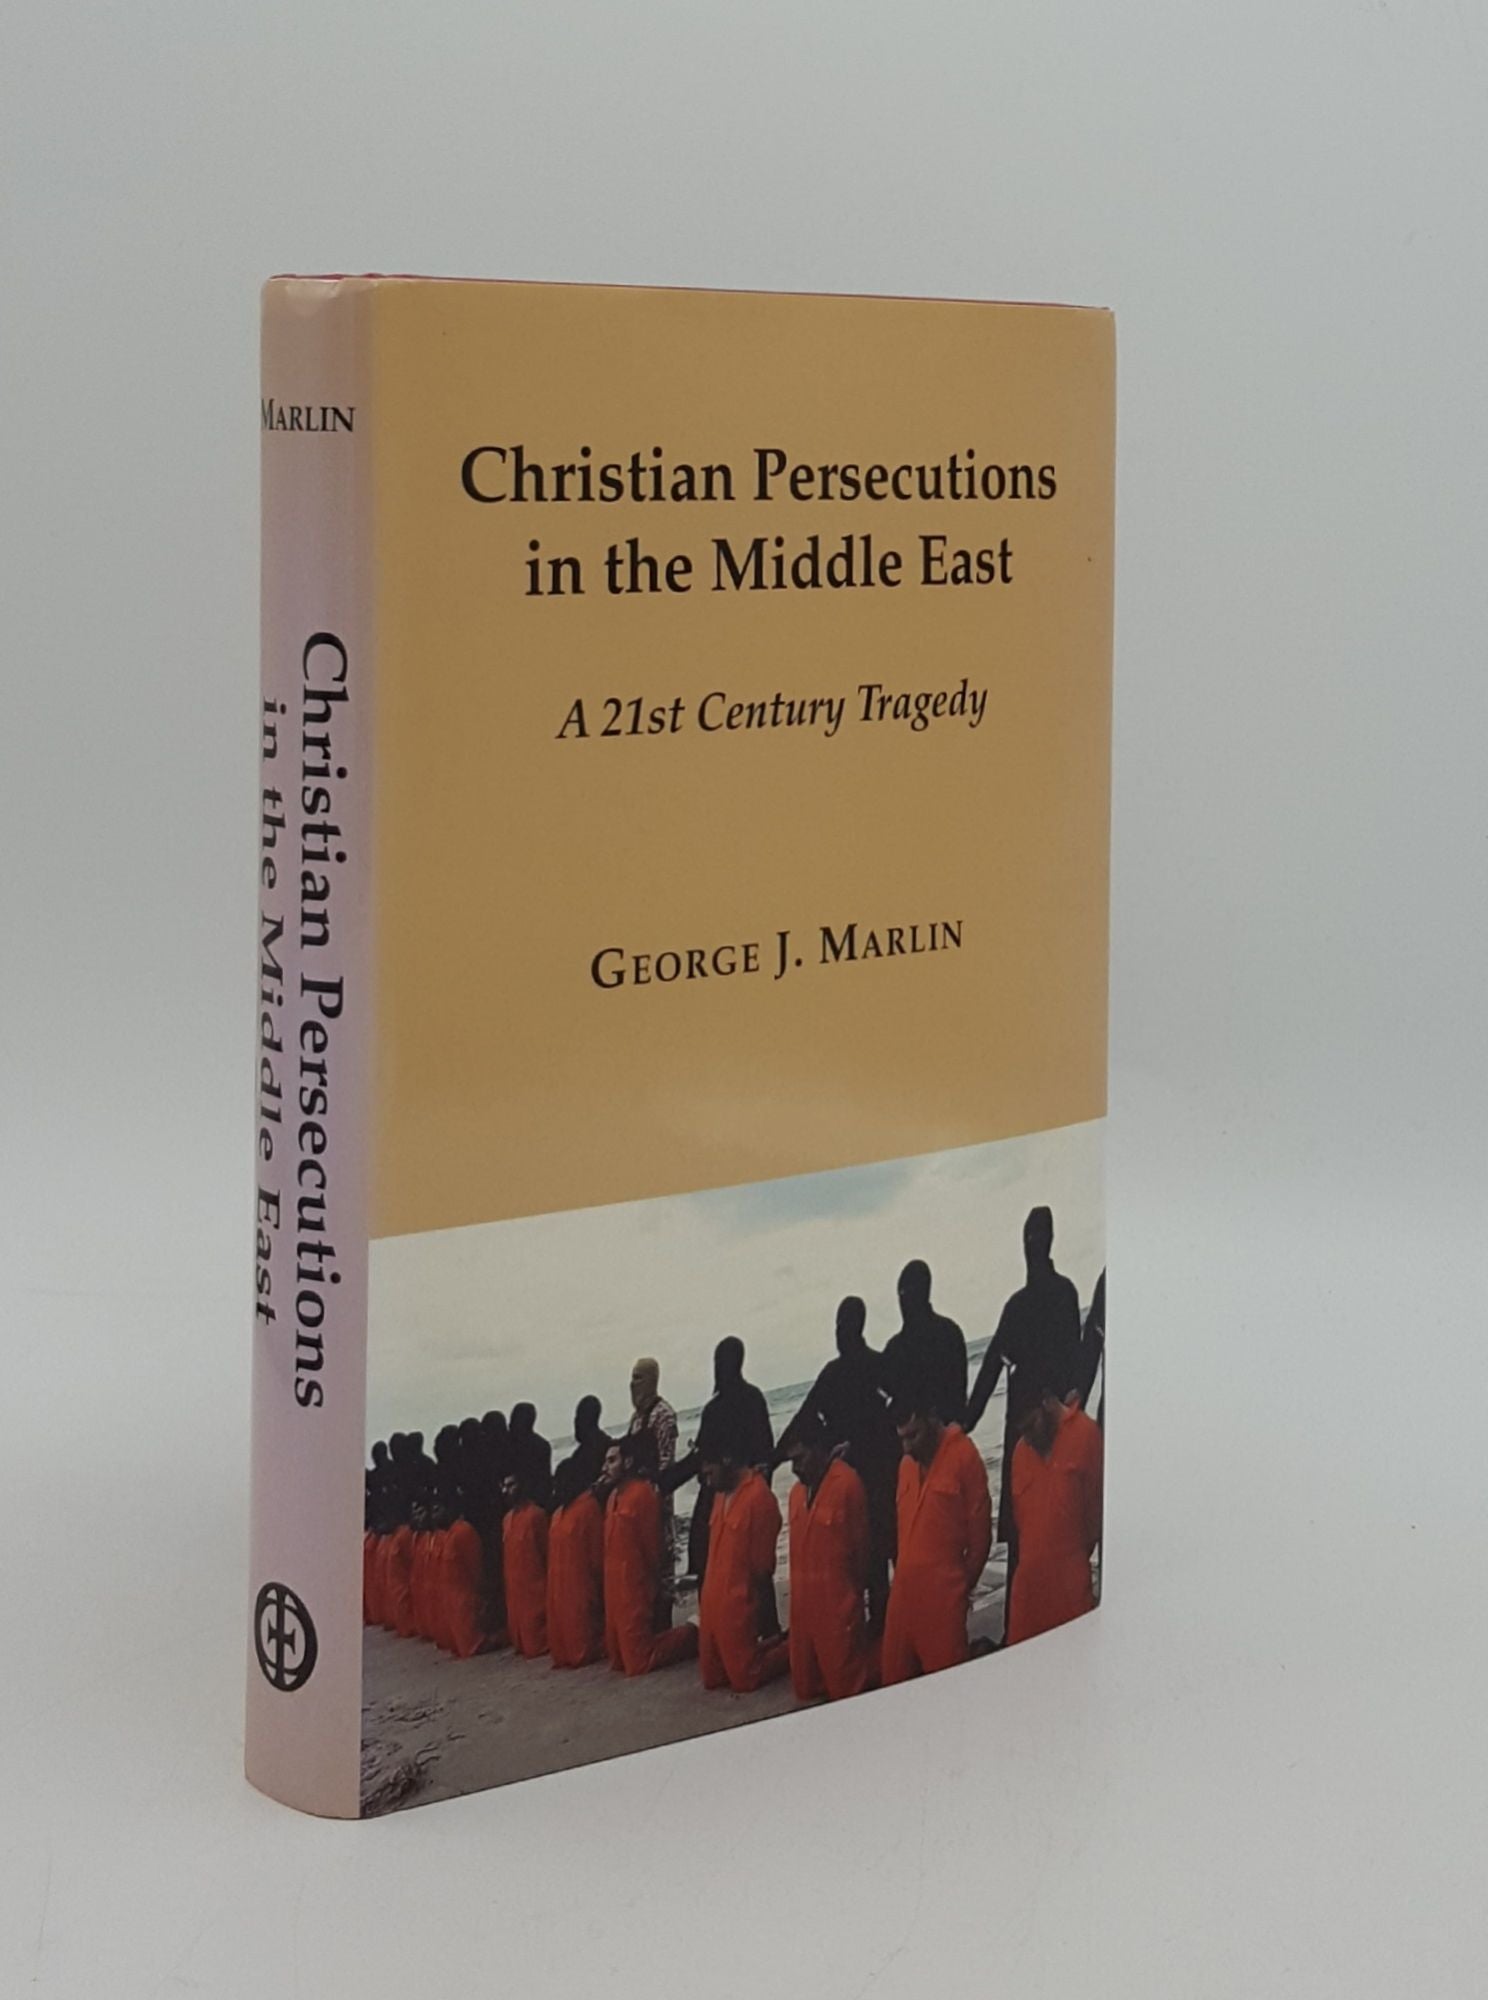 MARLIN George J. - Christian Persecutions in the Middle East a 21st Century Tragedy